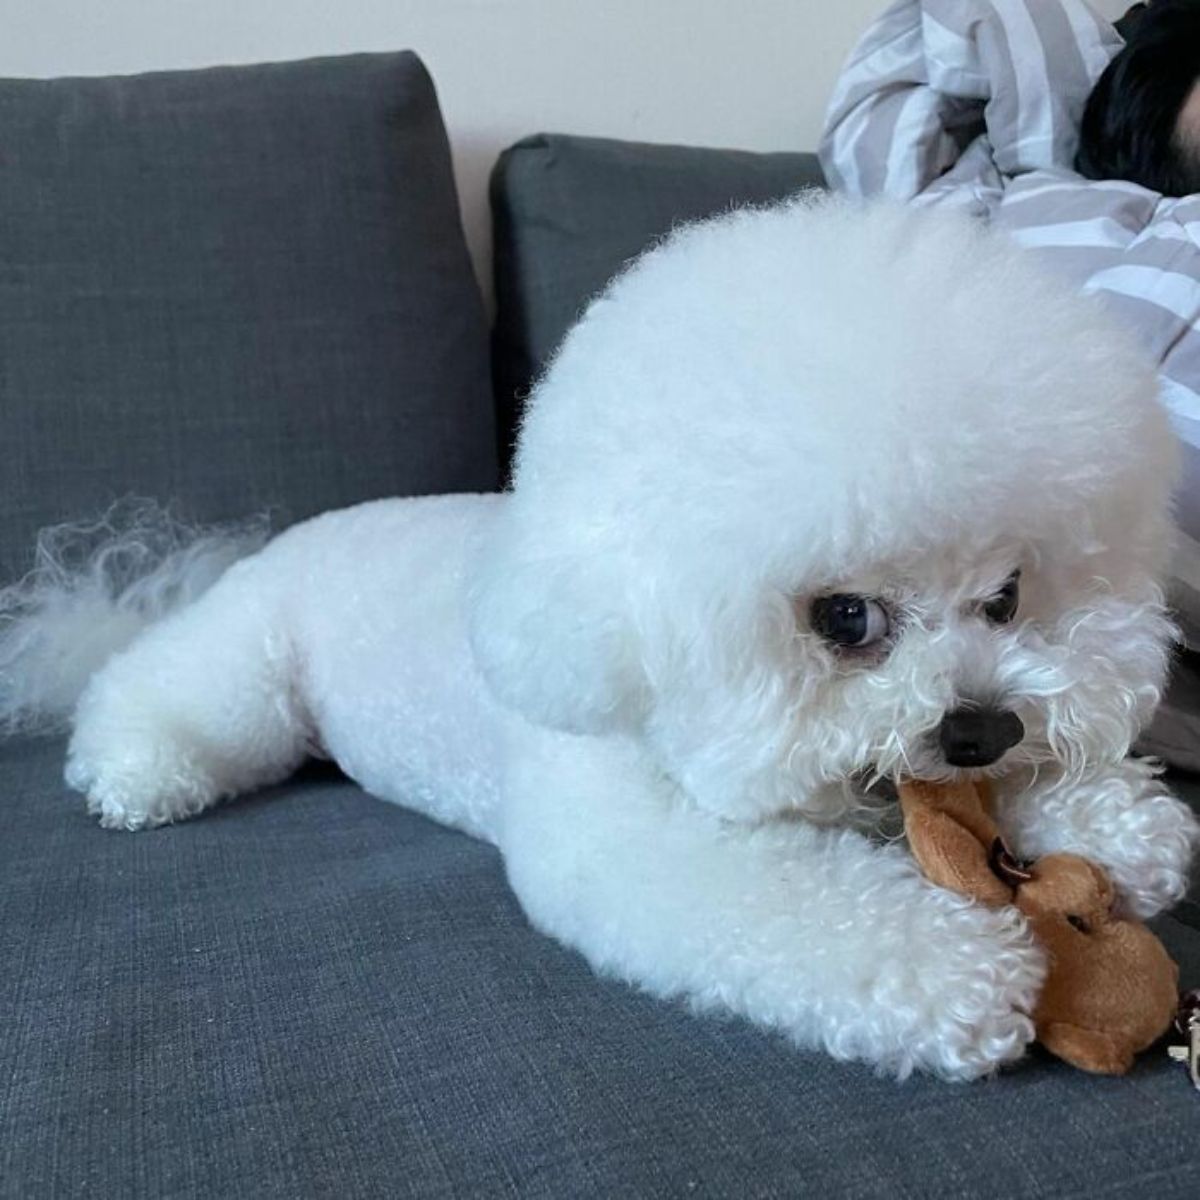 small fluffy white dog chewing on a brown stuffed toy